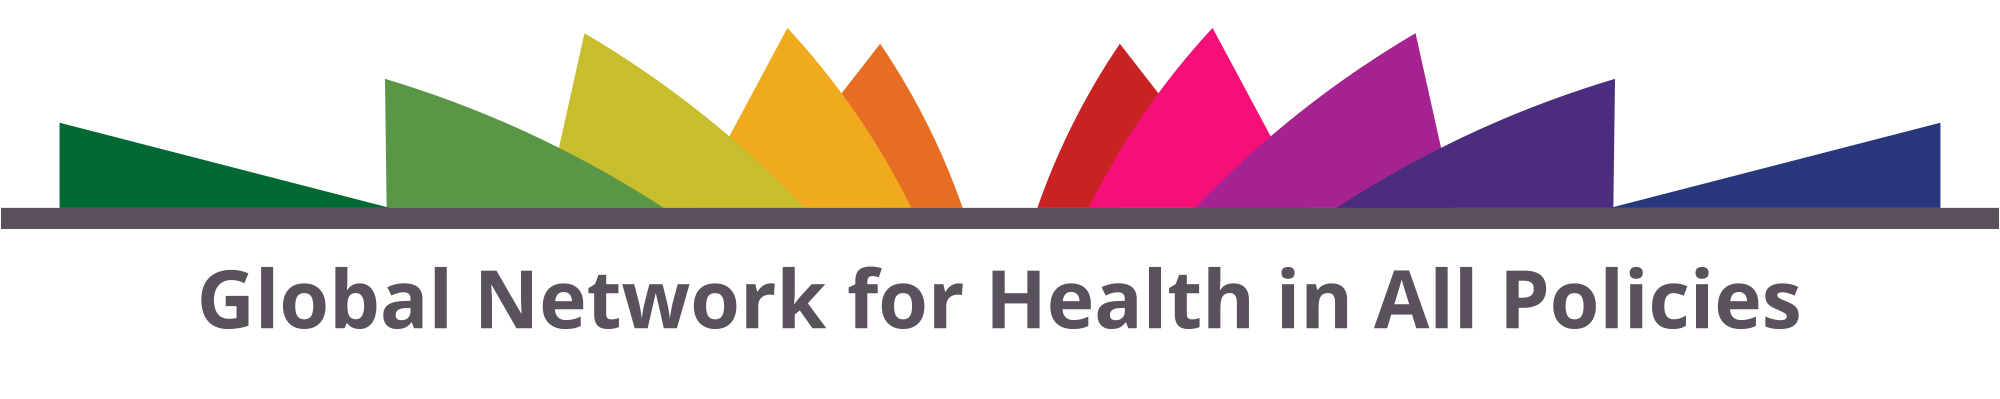 Global Network for Health in All Policies logo.